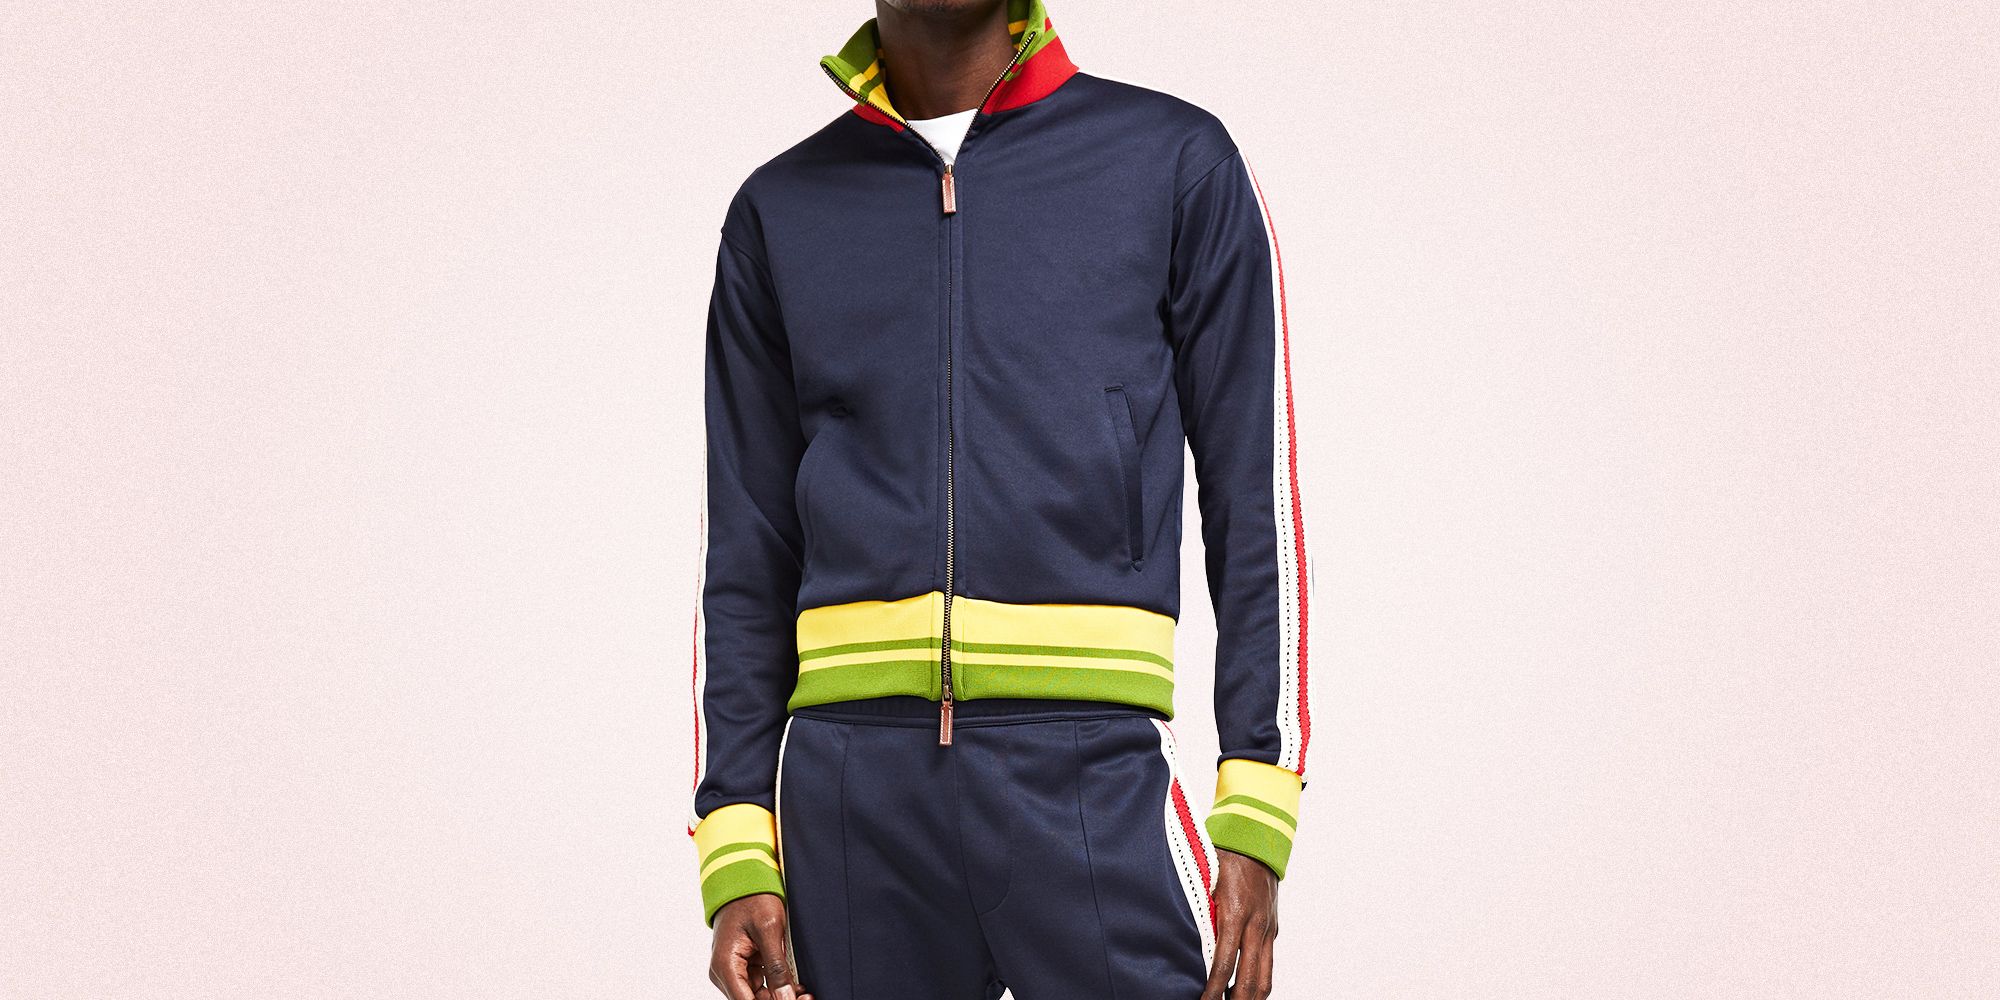 Mens Lightweight Soft and Durable Tracksuits and Sweatsuits 